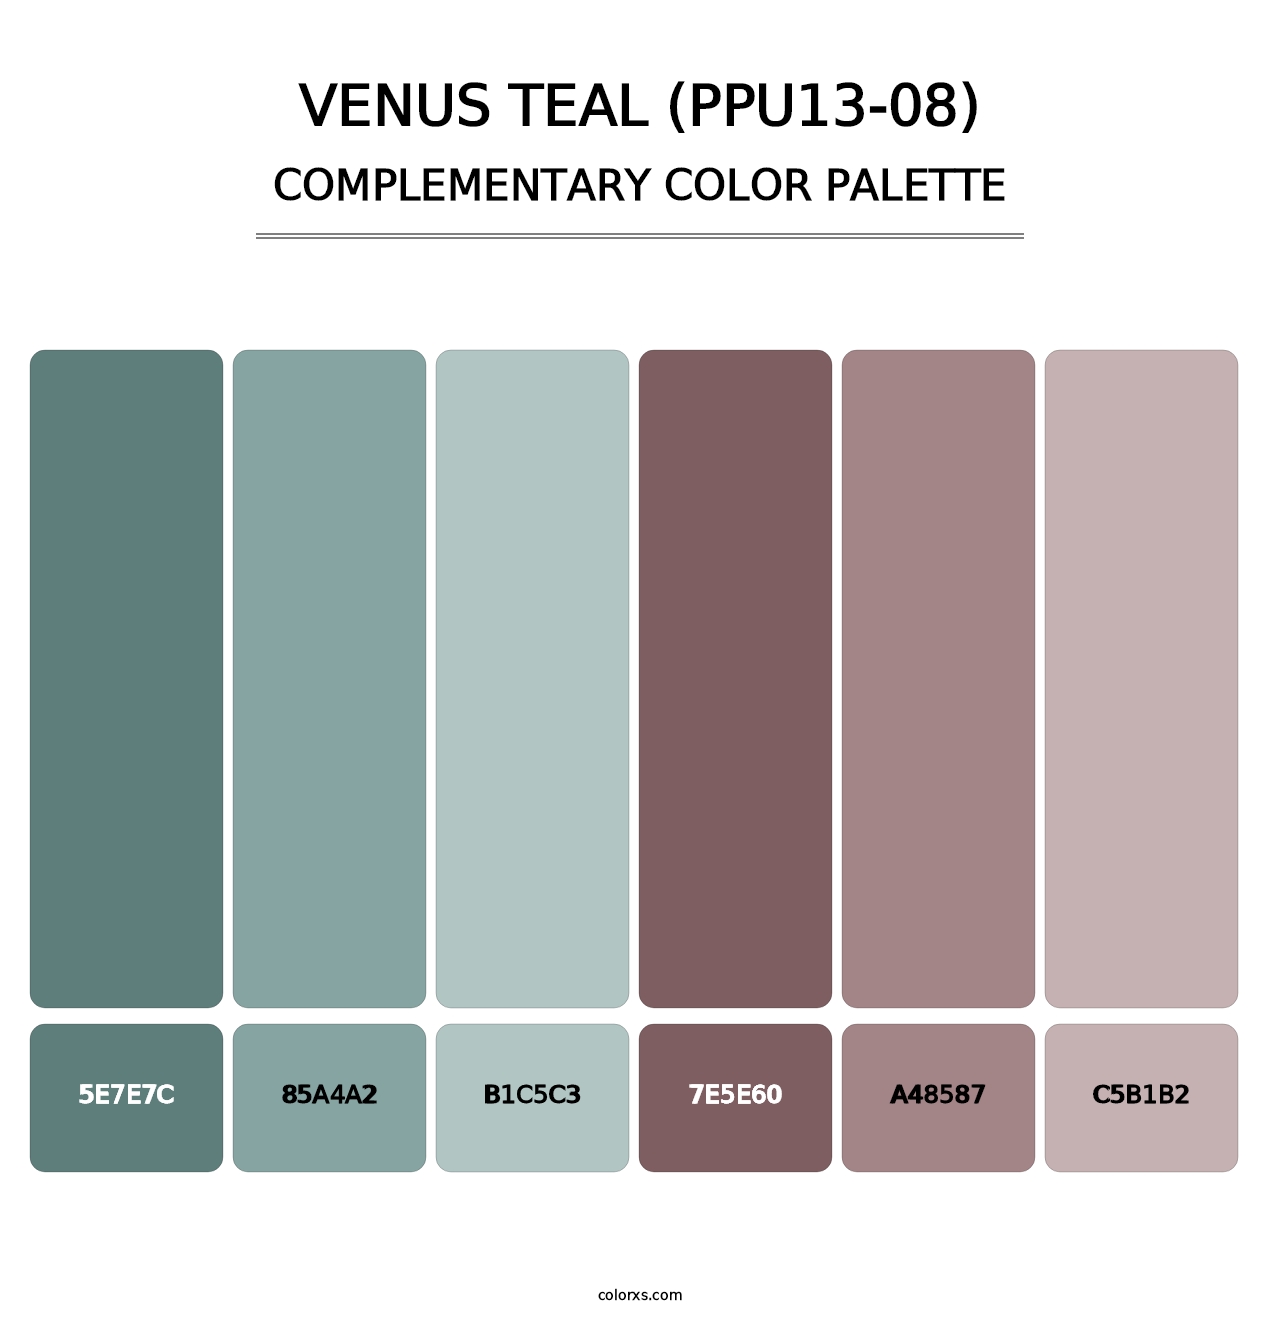 Venus Teal (PPU13-08) - Complementary Color Palette